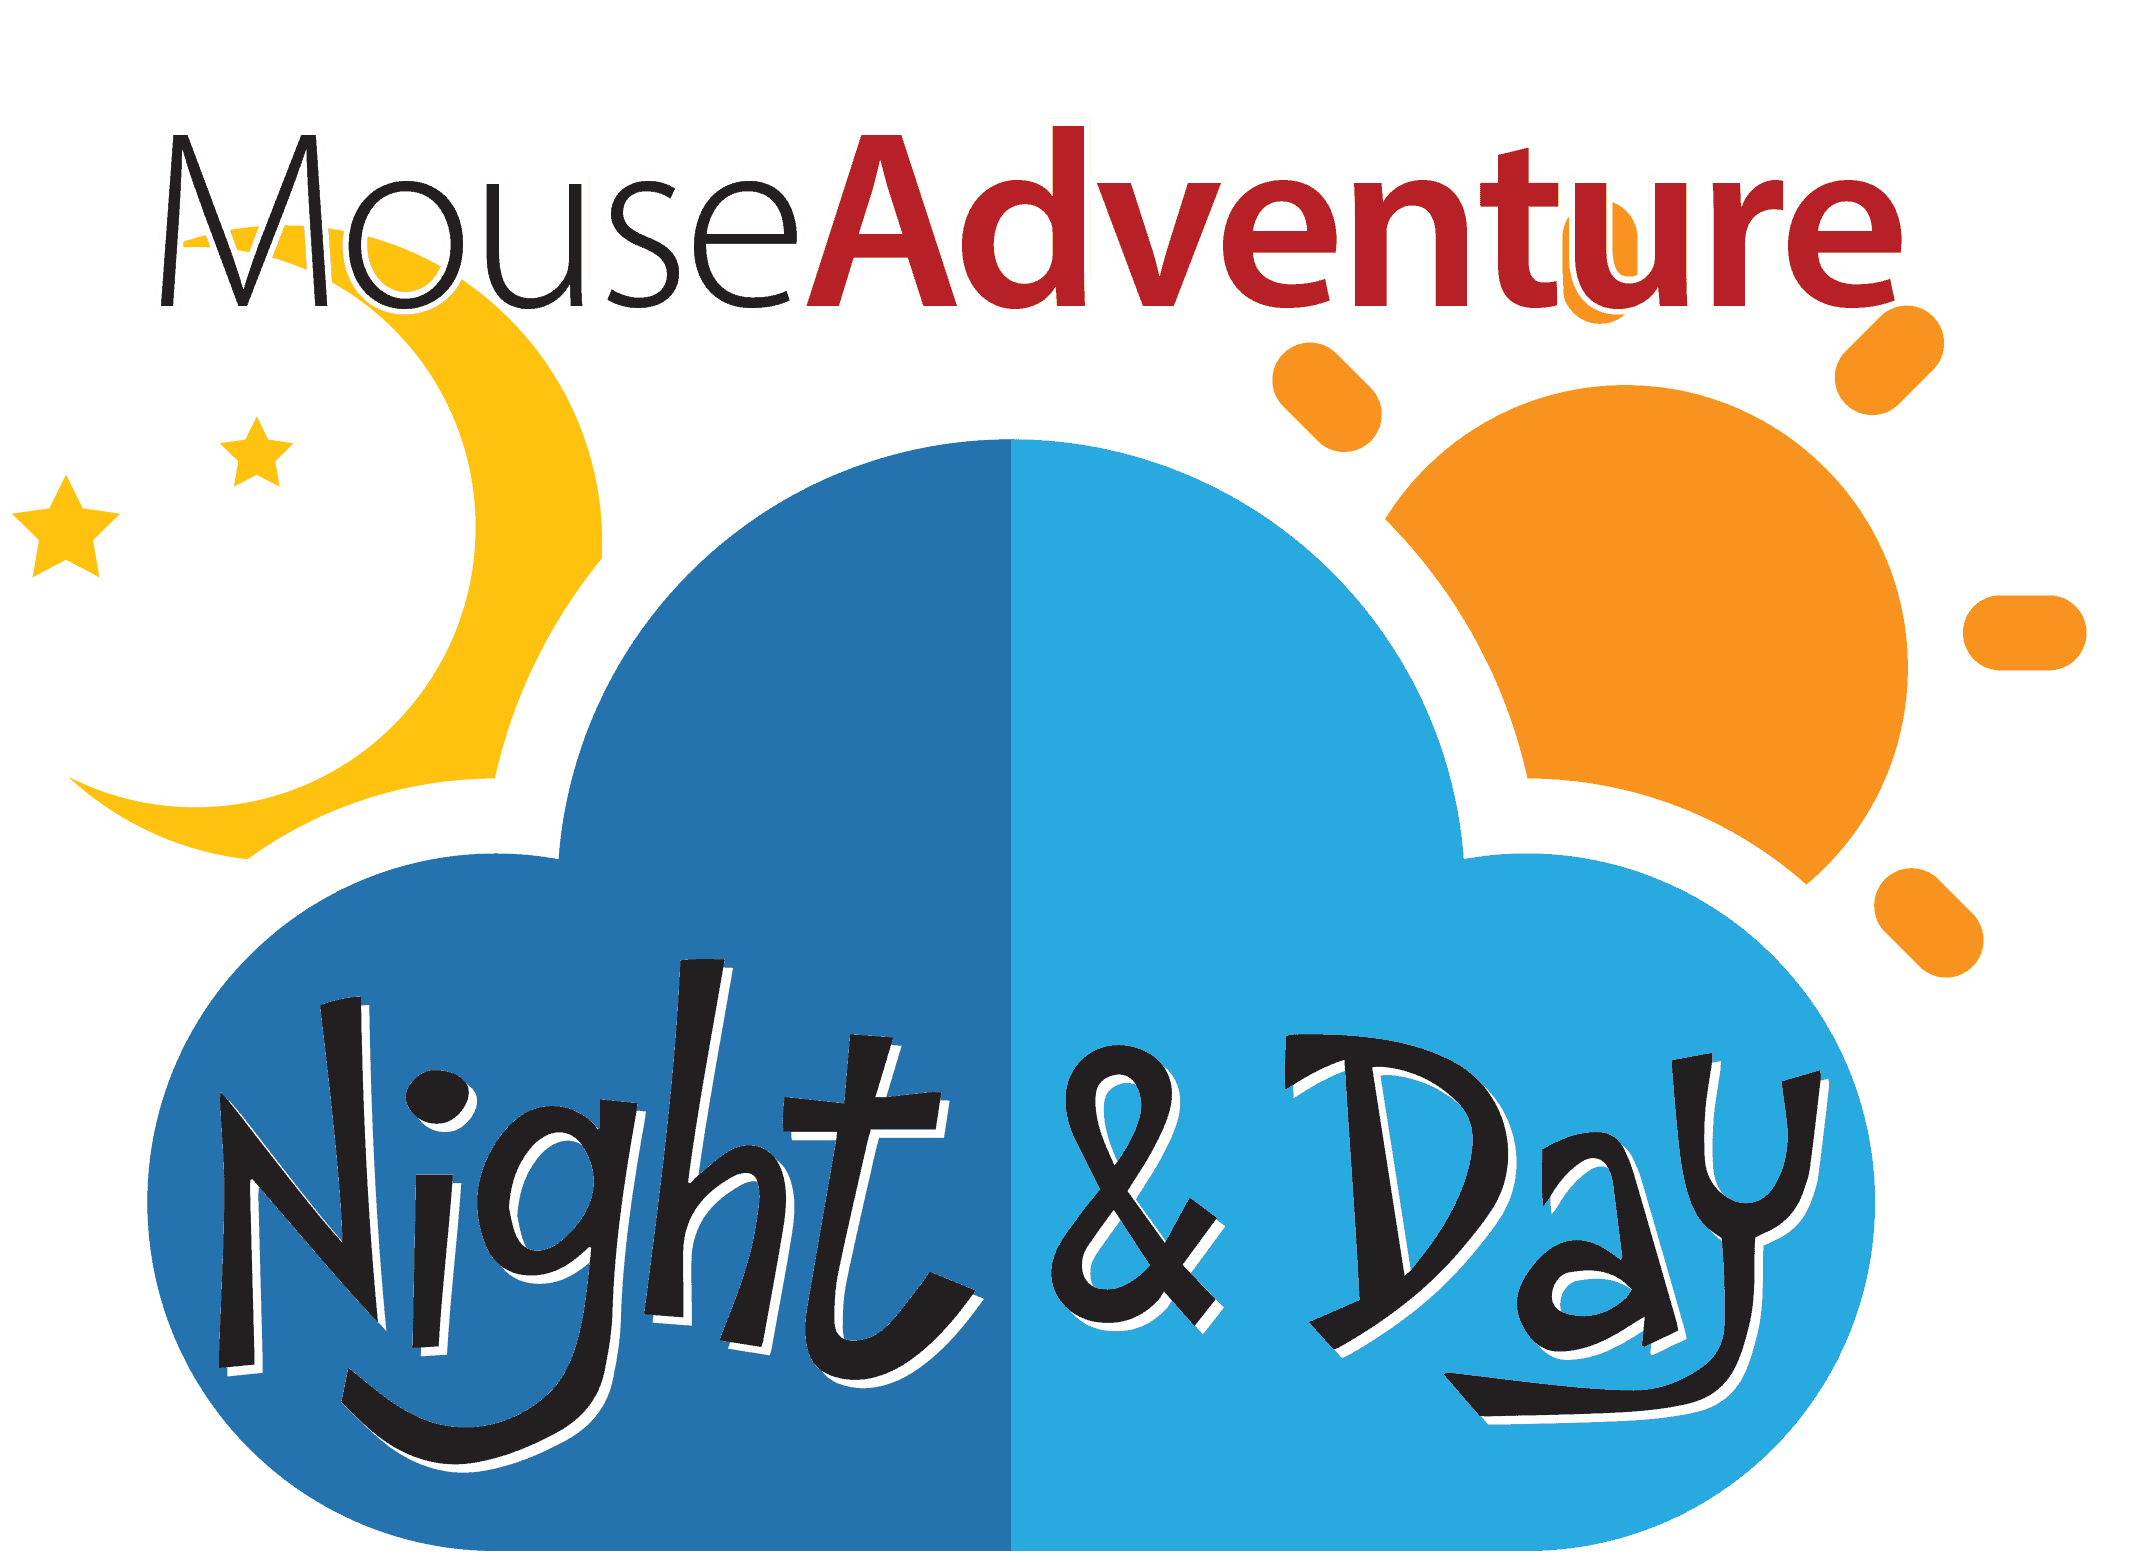 Mouse Adventure Night and Day